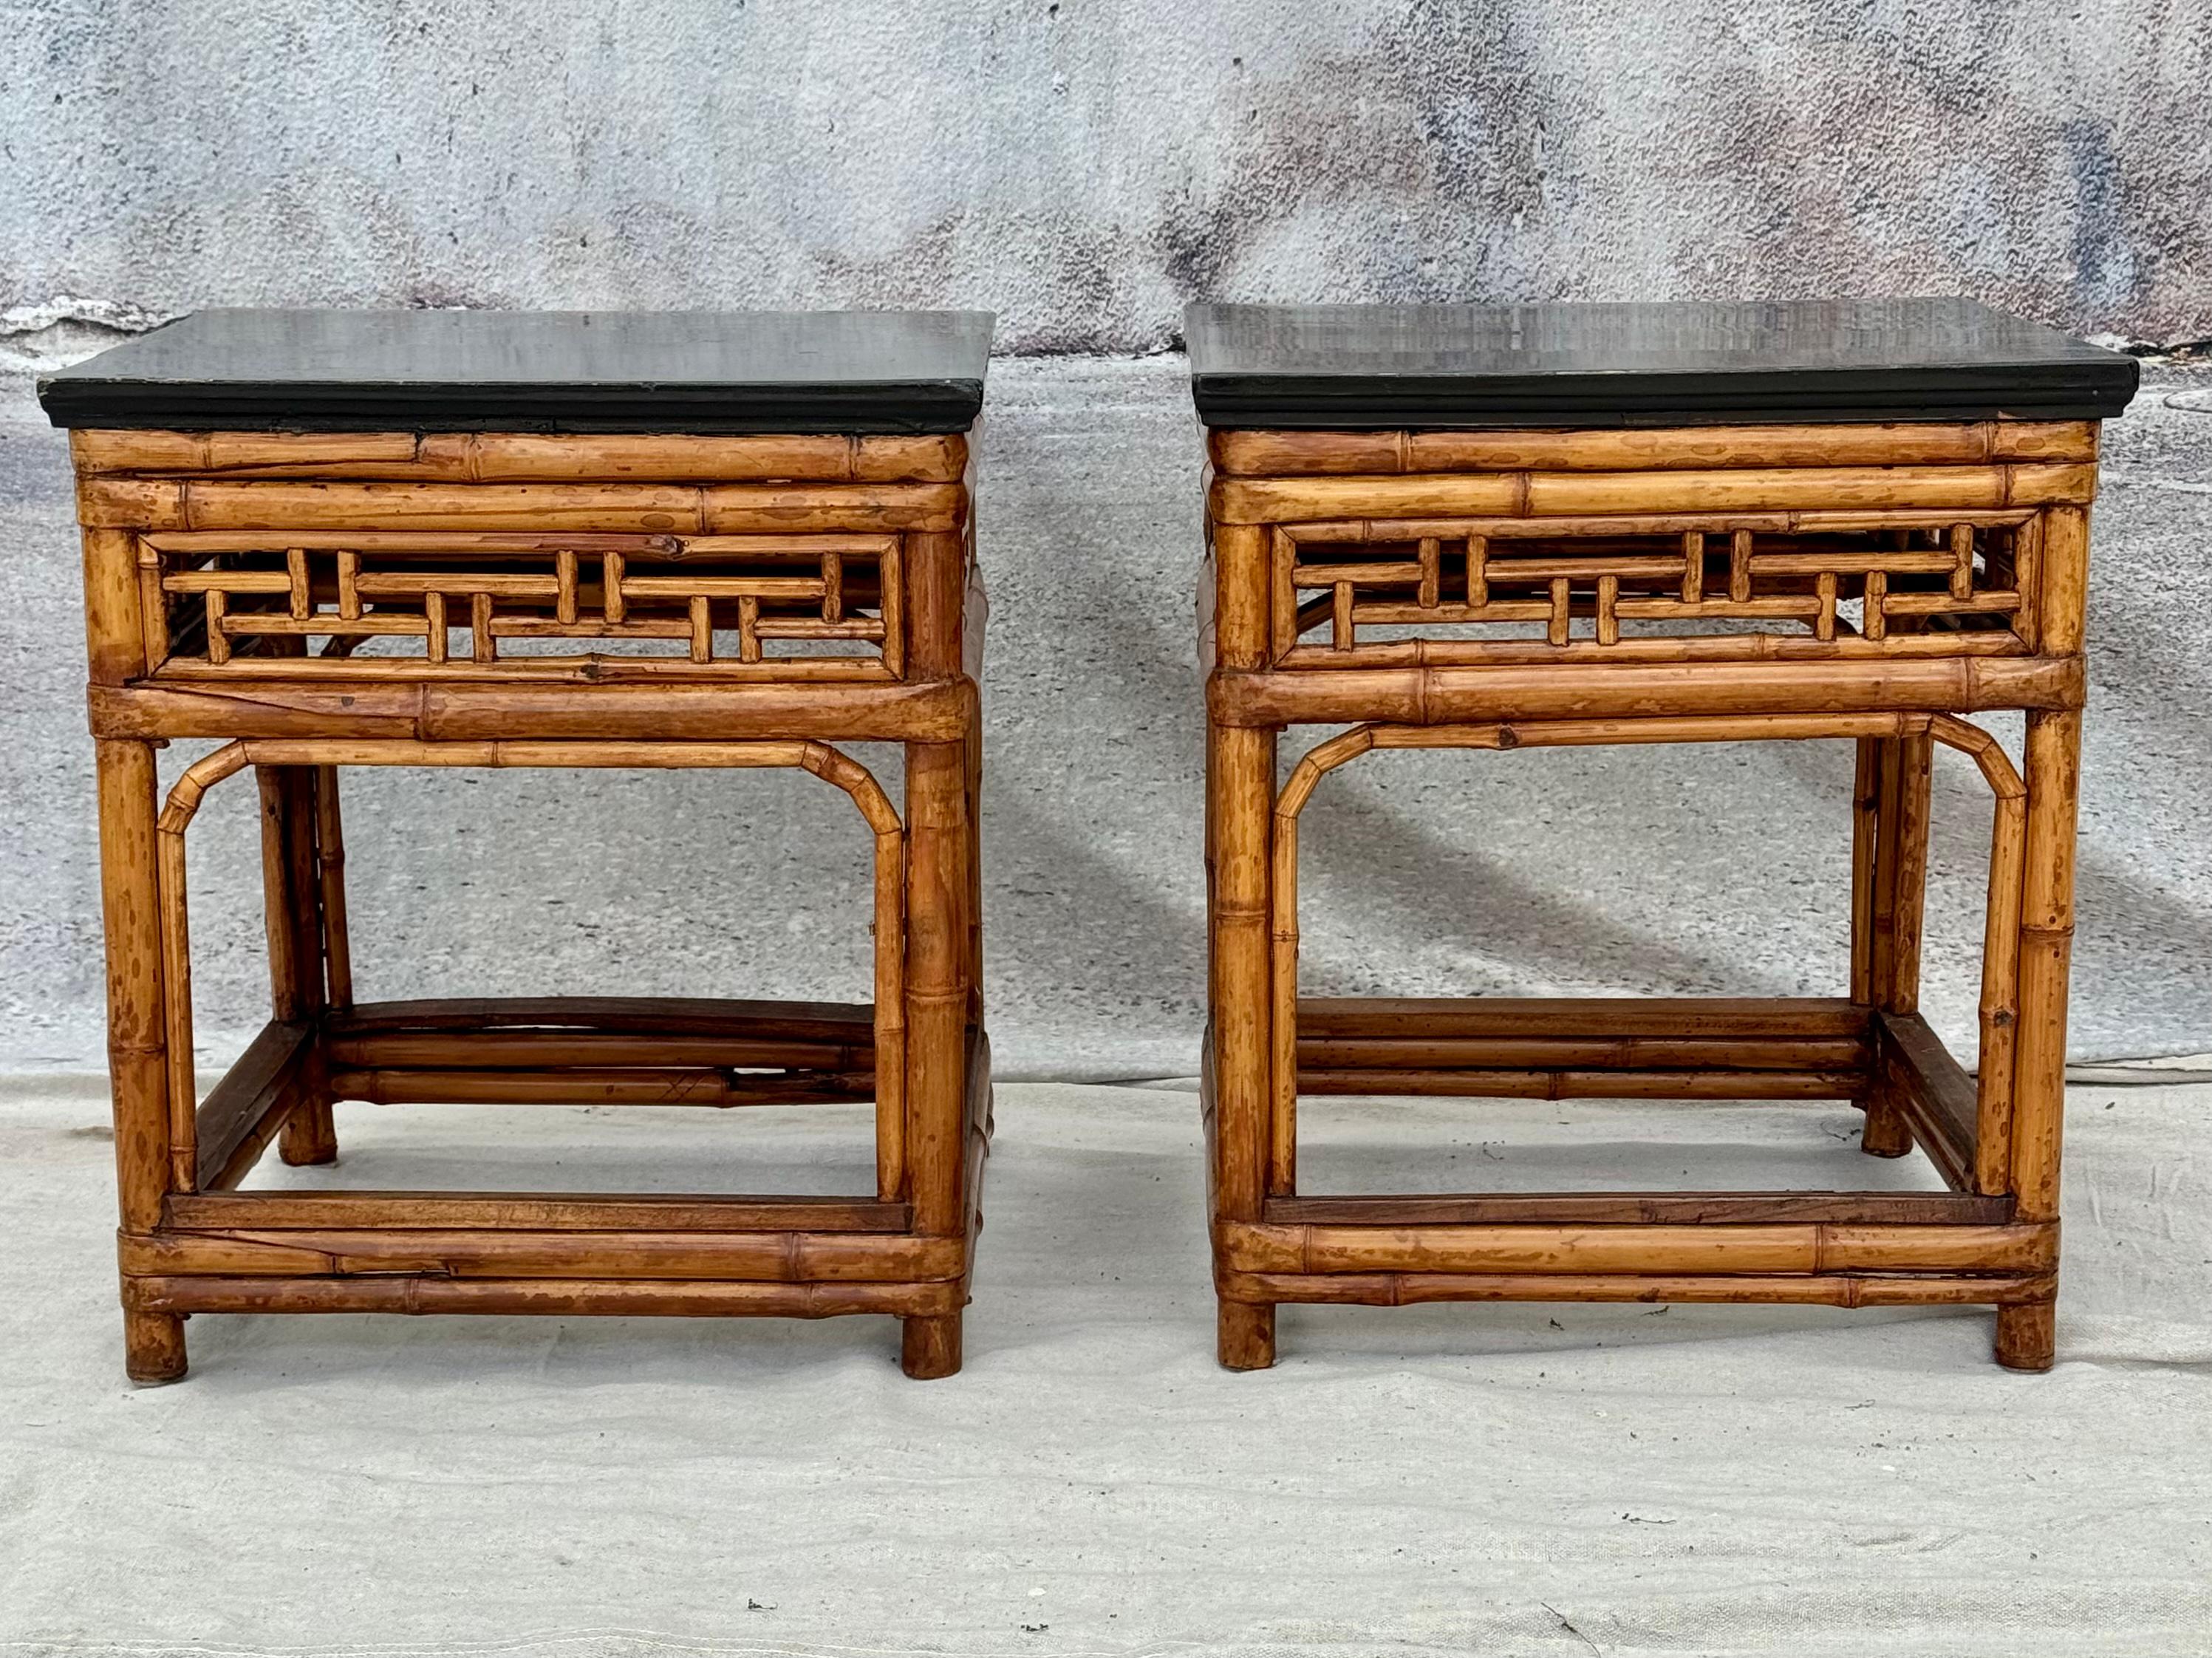 An amazing pair of McGuire style Chinese export ebonized top bamboo side tables. Tables have intricate geometric bamboo open fretwork decoration and are topped with square black wood tops supported by round bamboo legs. 